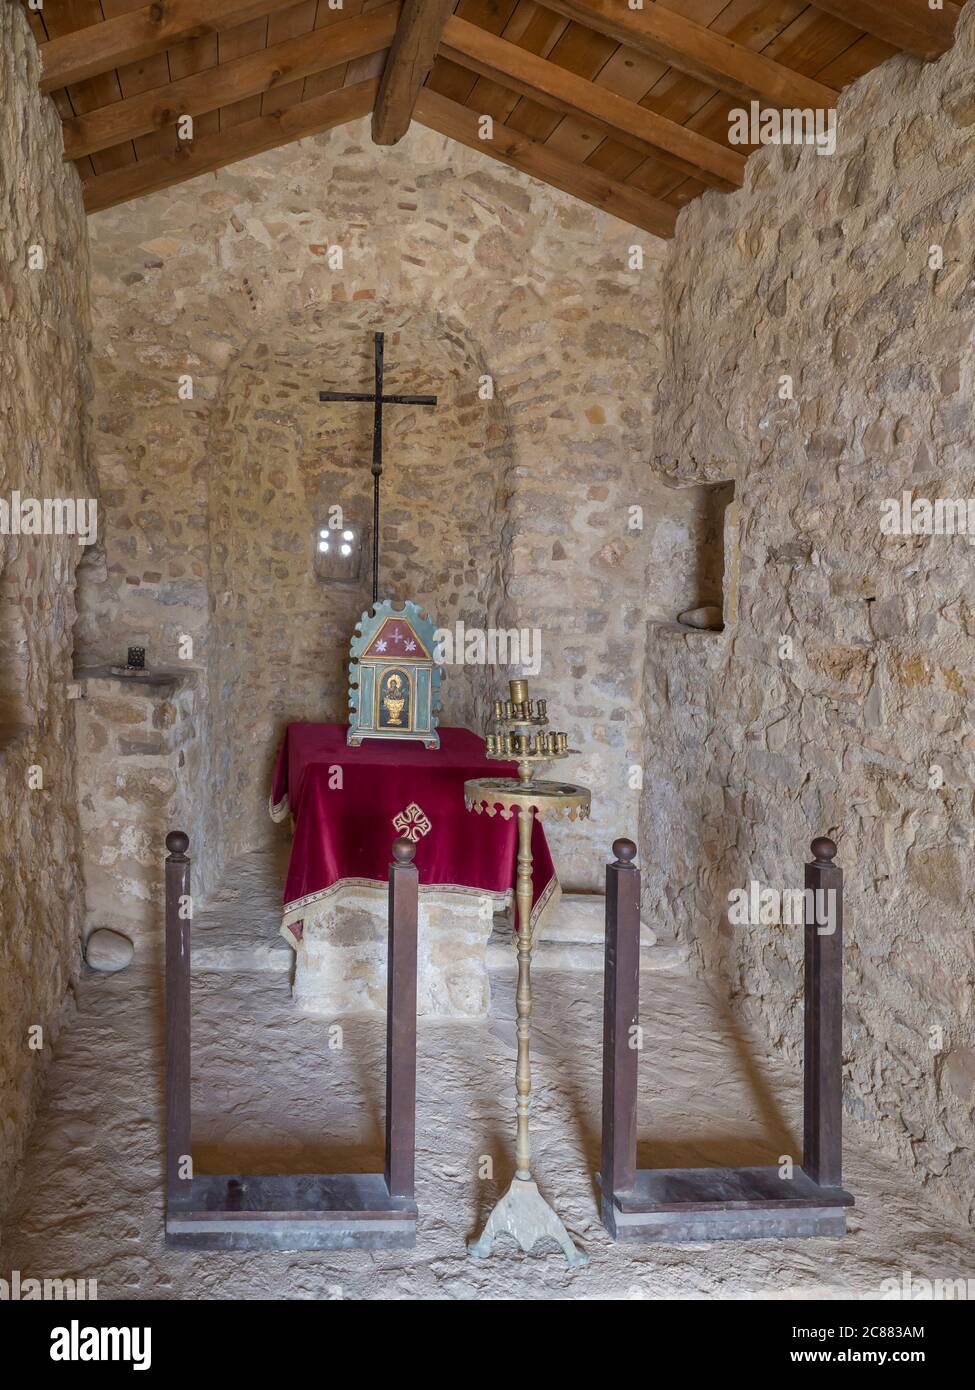 Greece, corfu, Paleokastritsa, september 26, 2018: Interior of small stone medieval chapel with wooden roof at fortified castle of Angelokastro close Stock Photo